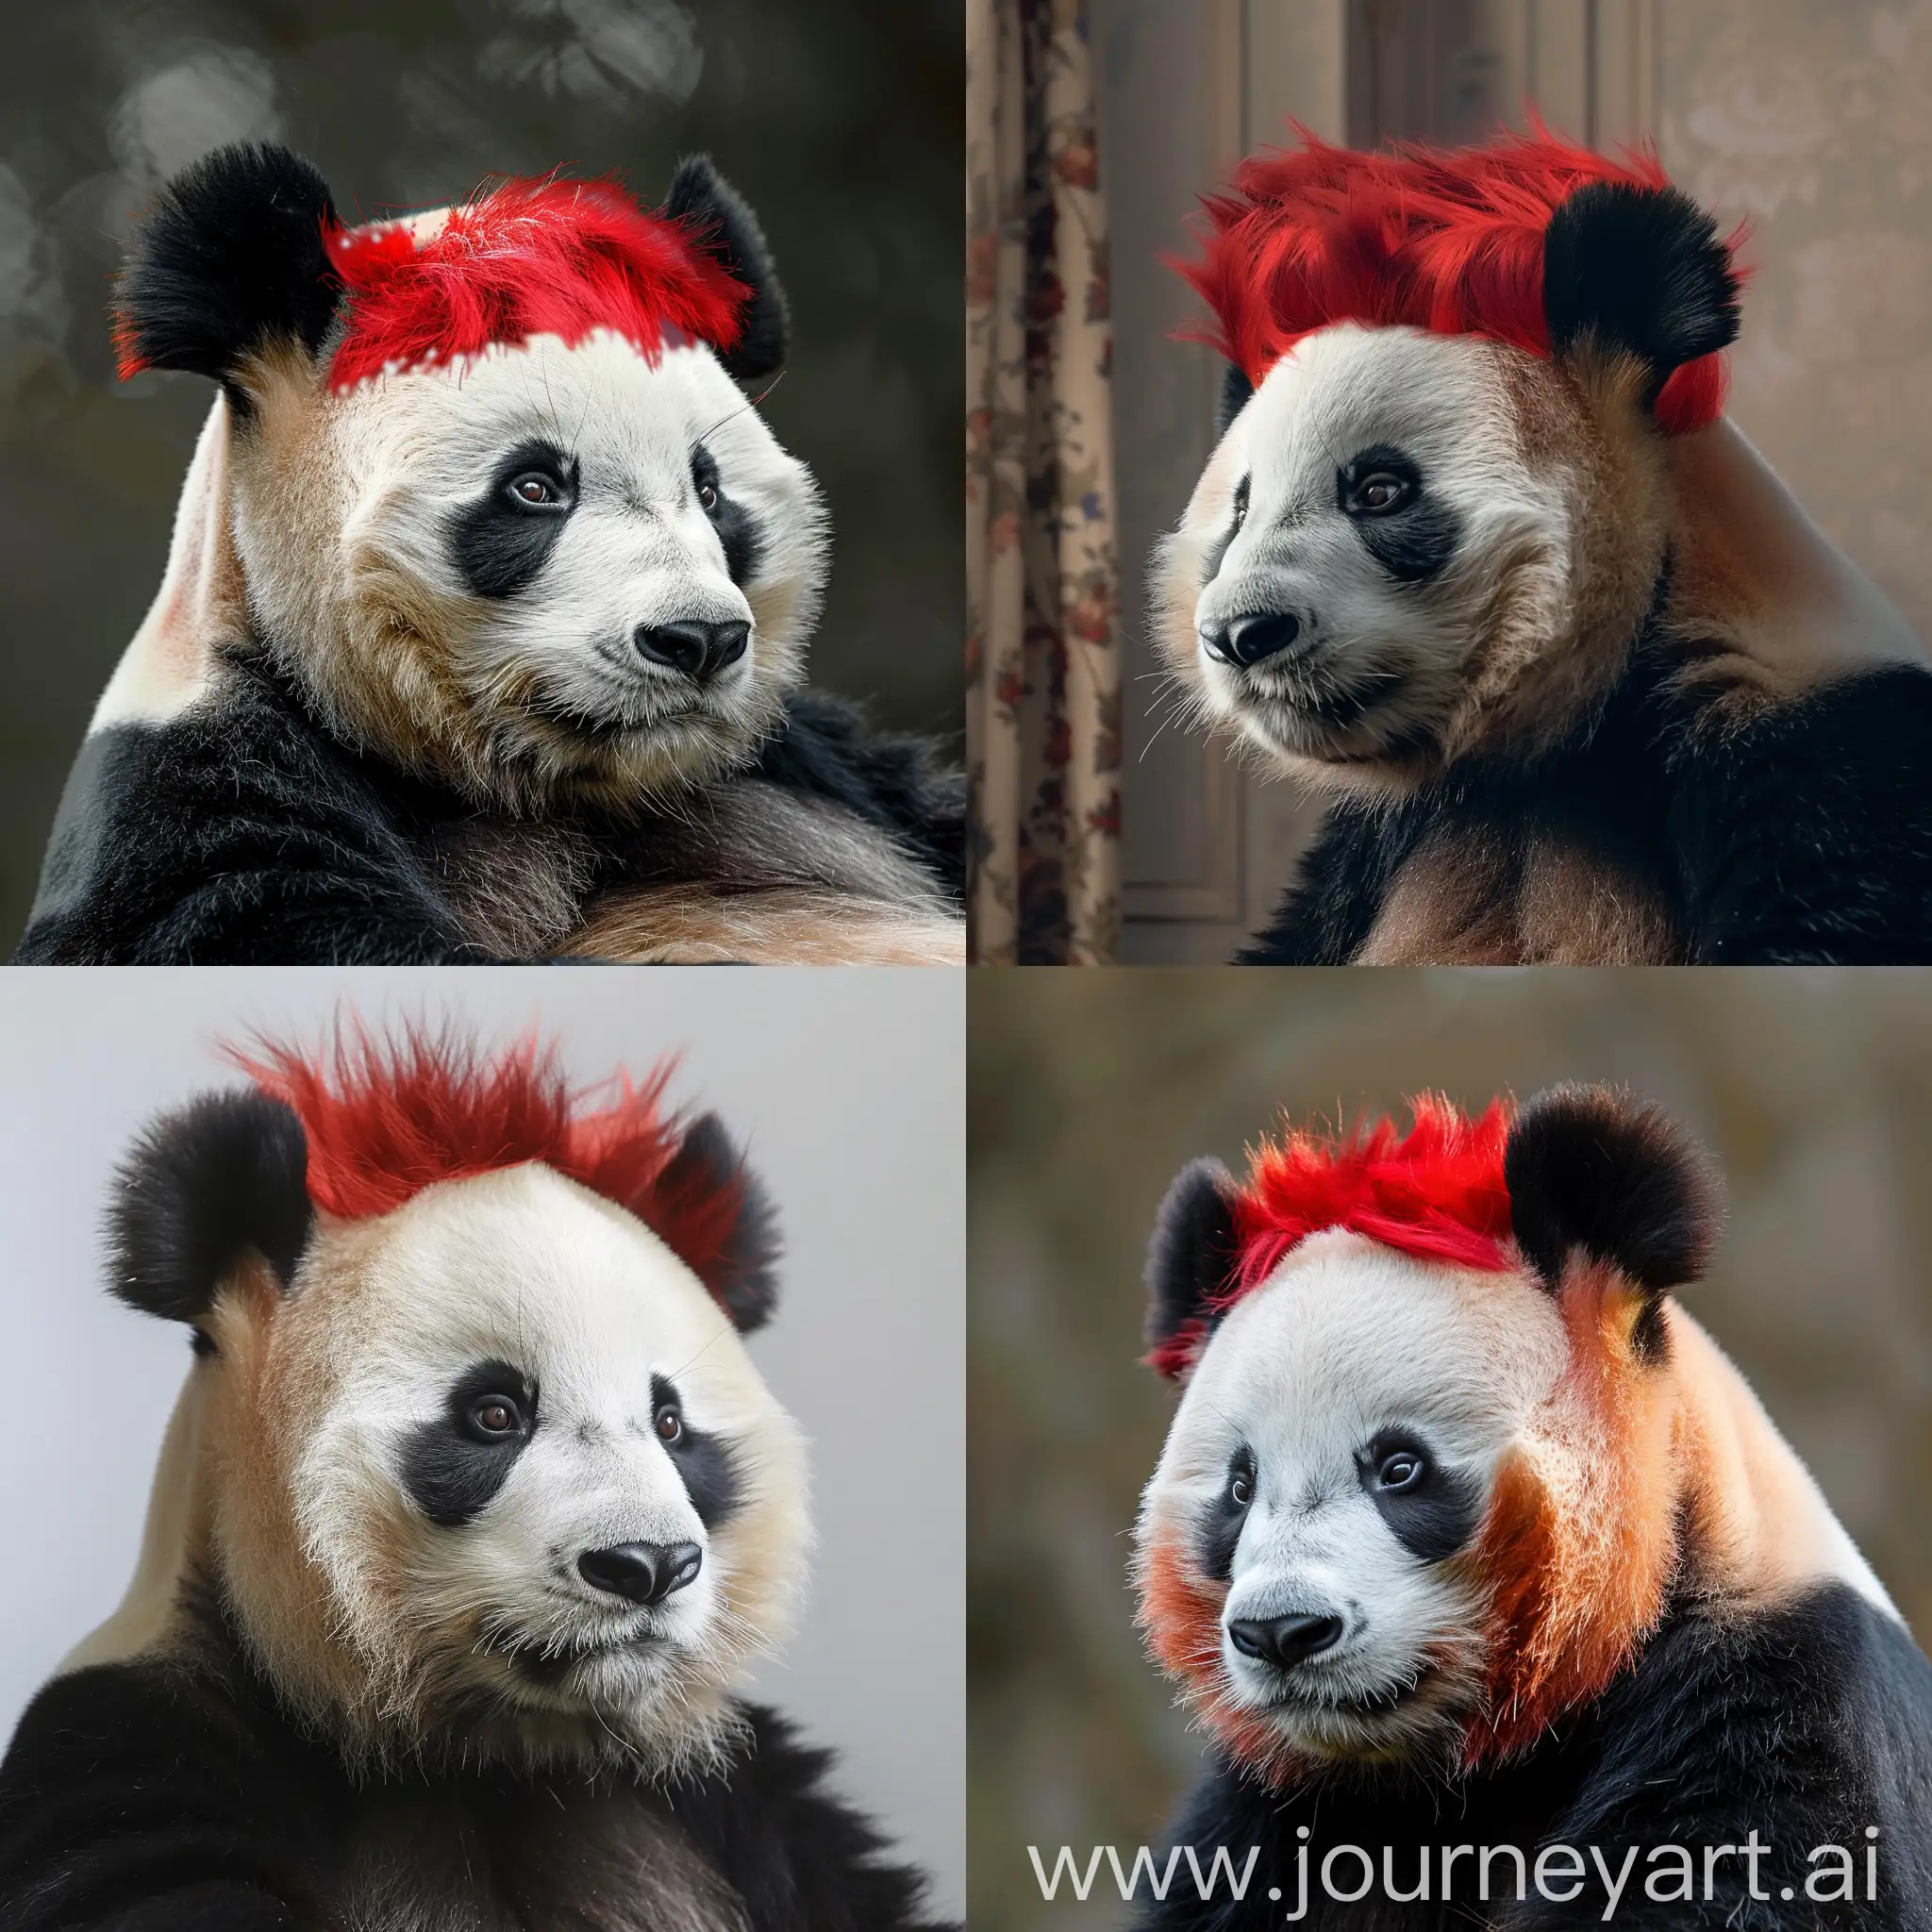 A panda with red hair